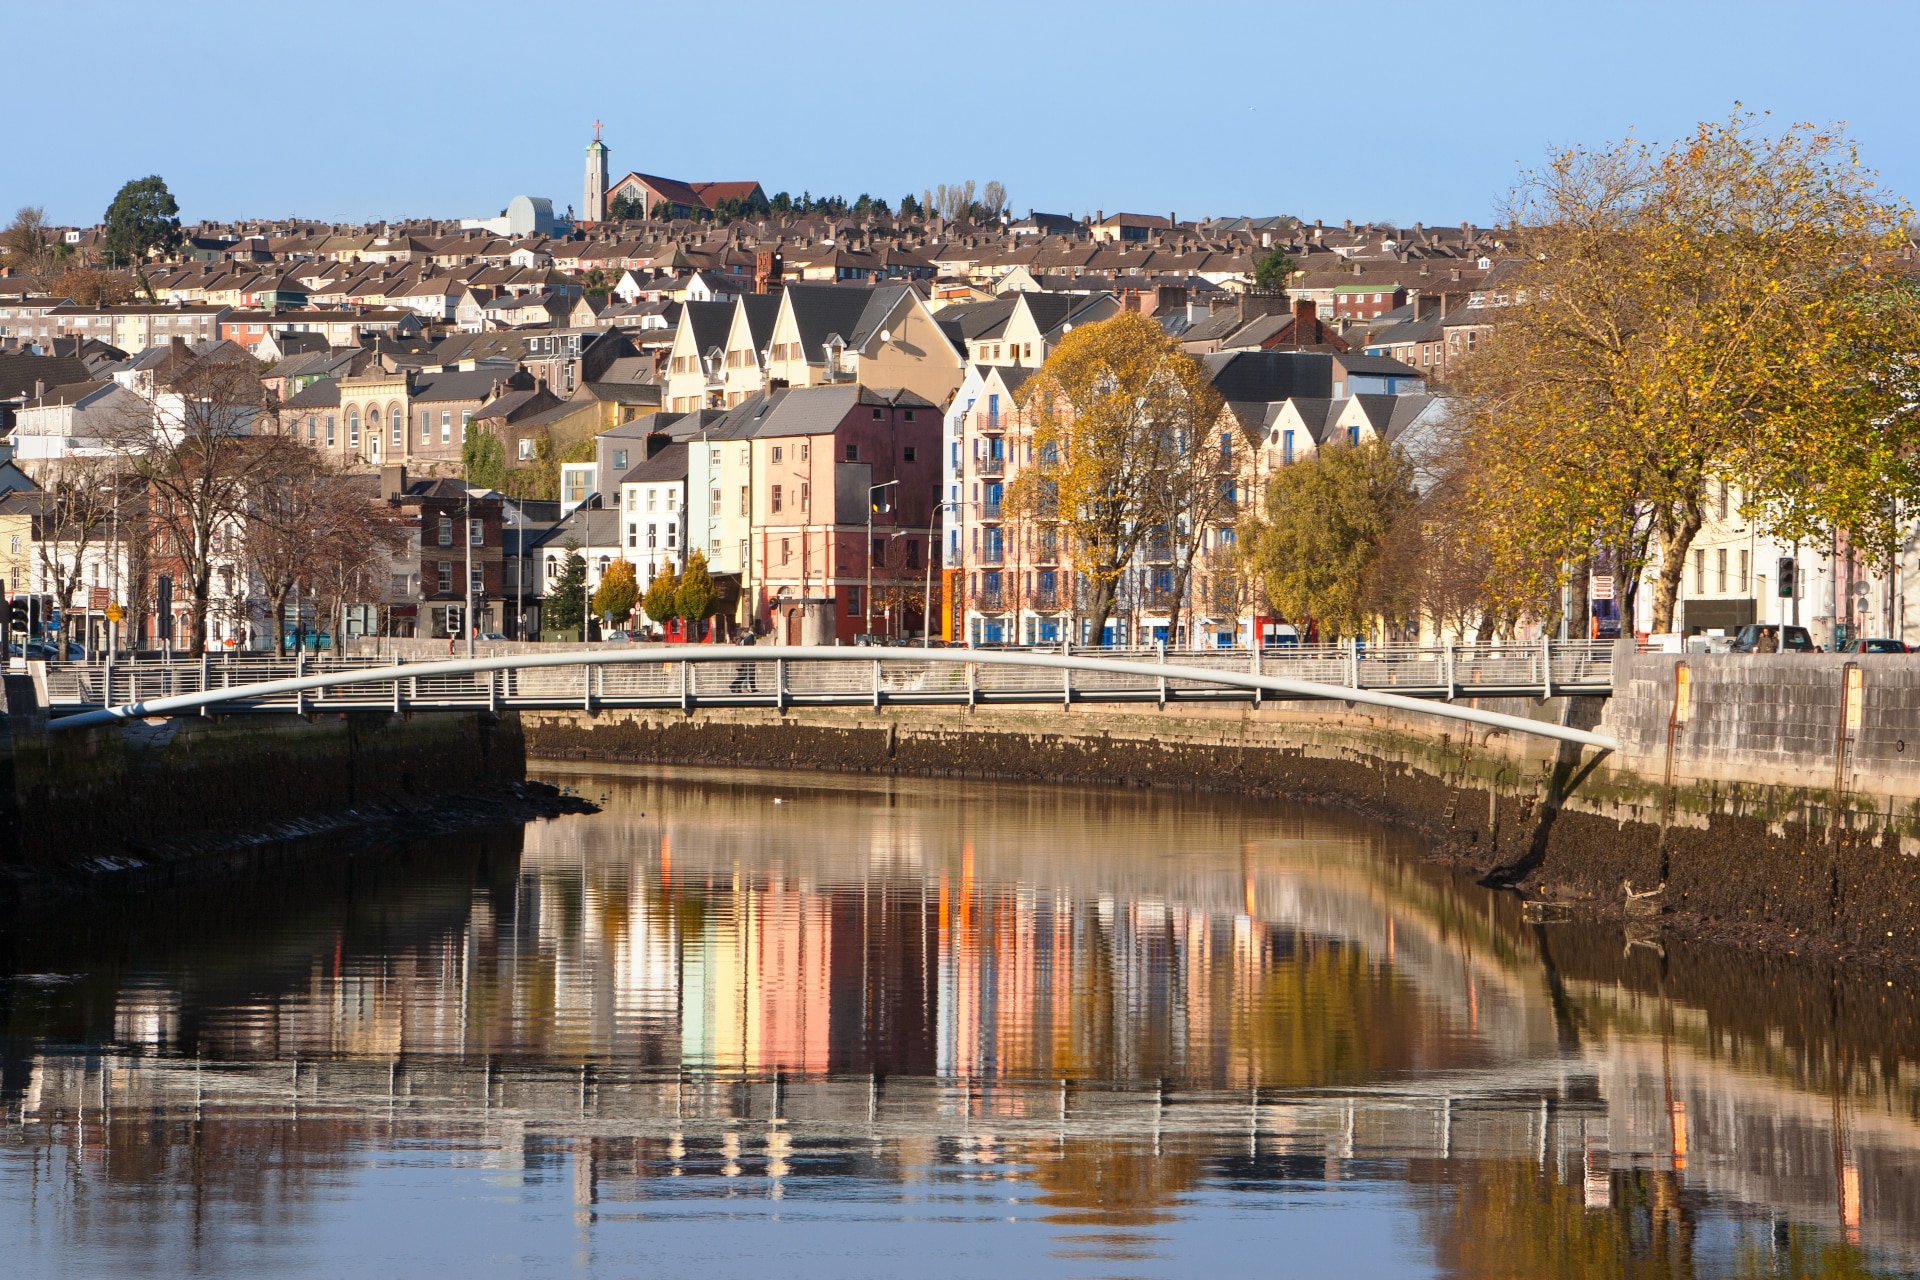 Cork City on the River Lee in Autumn